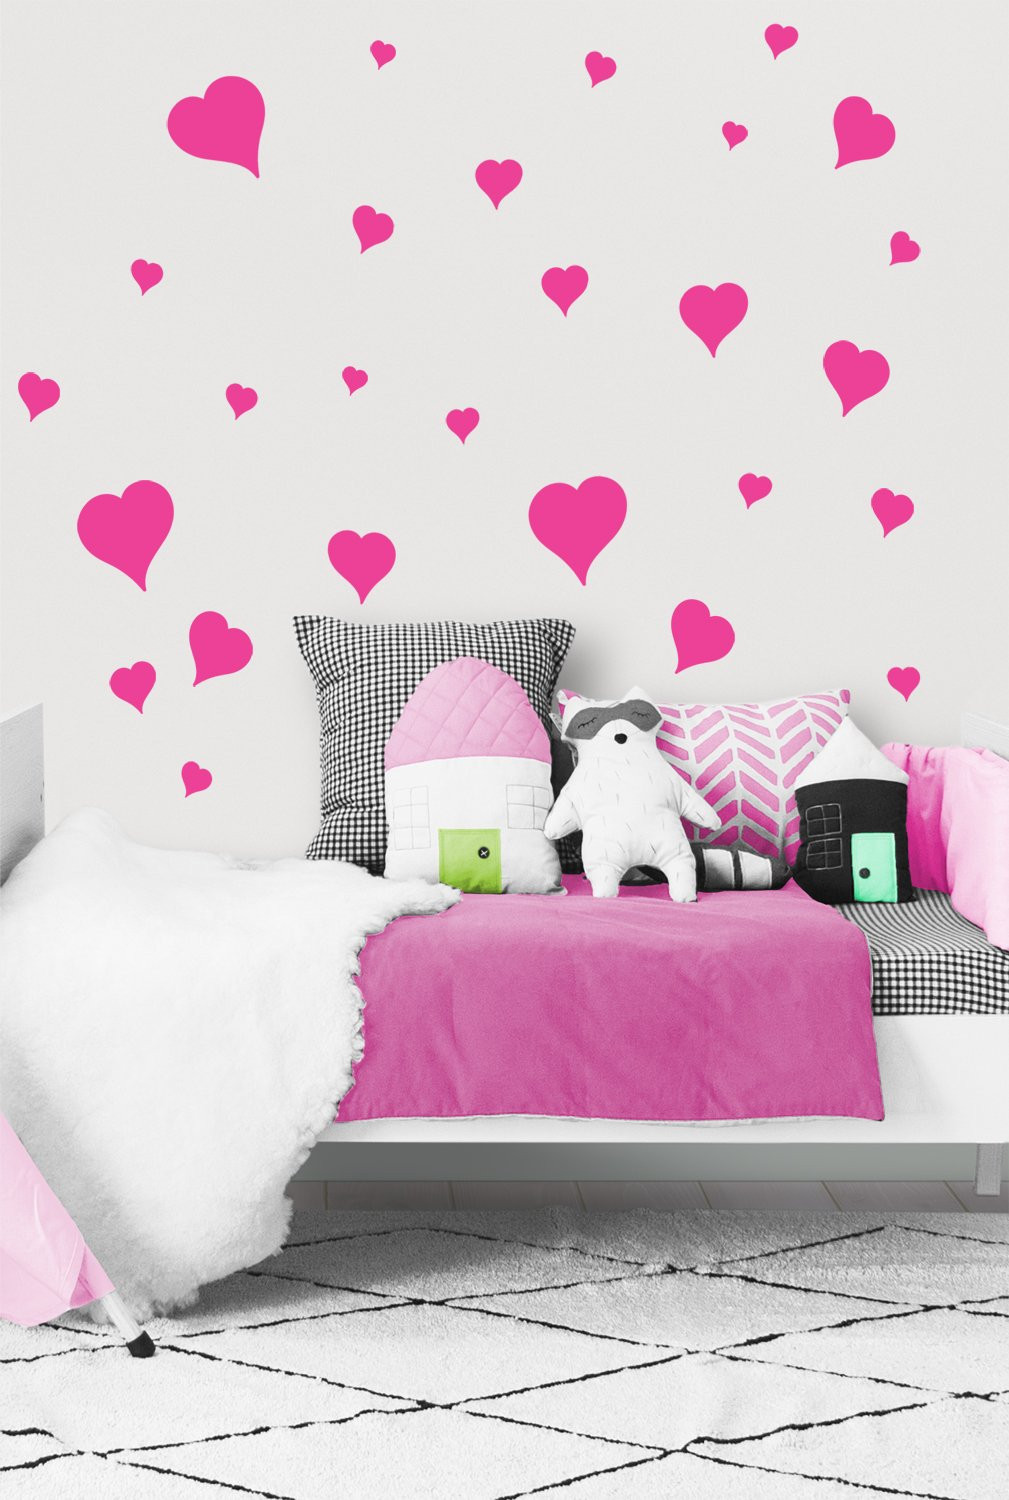 Girls Bedroom Wall Stickers
 Heart Wall Decals Girls Room Stickers Hot Pink